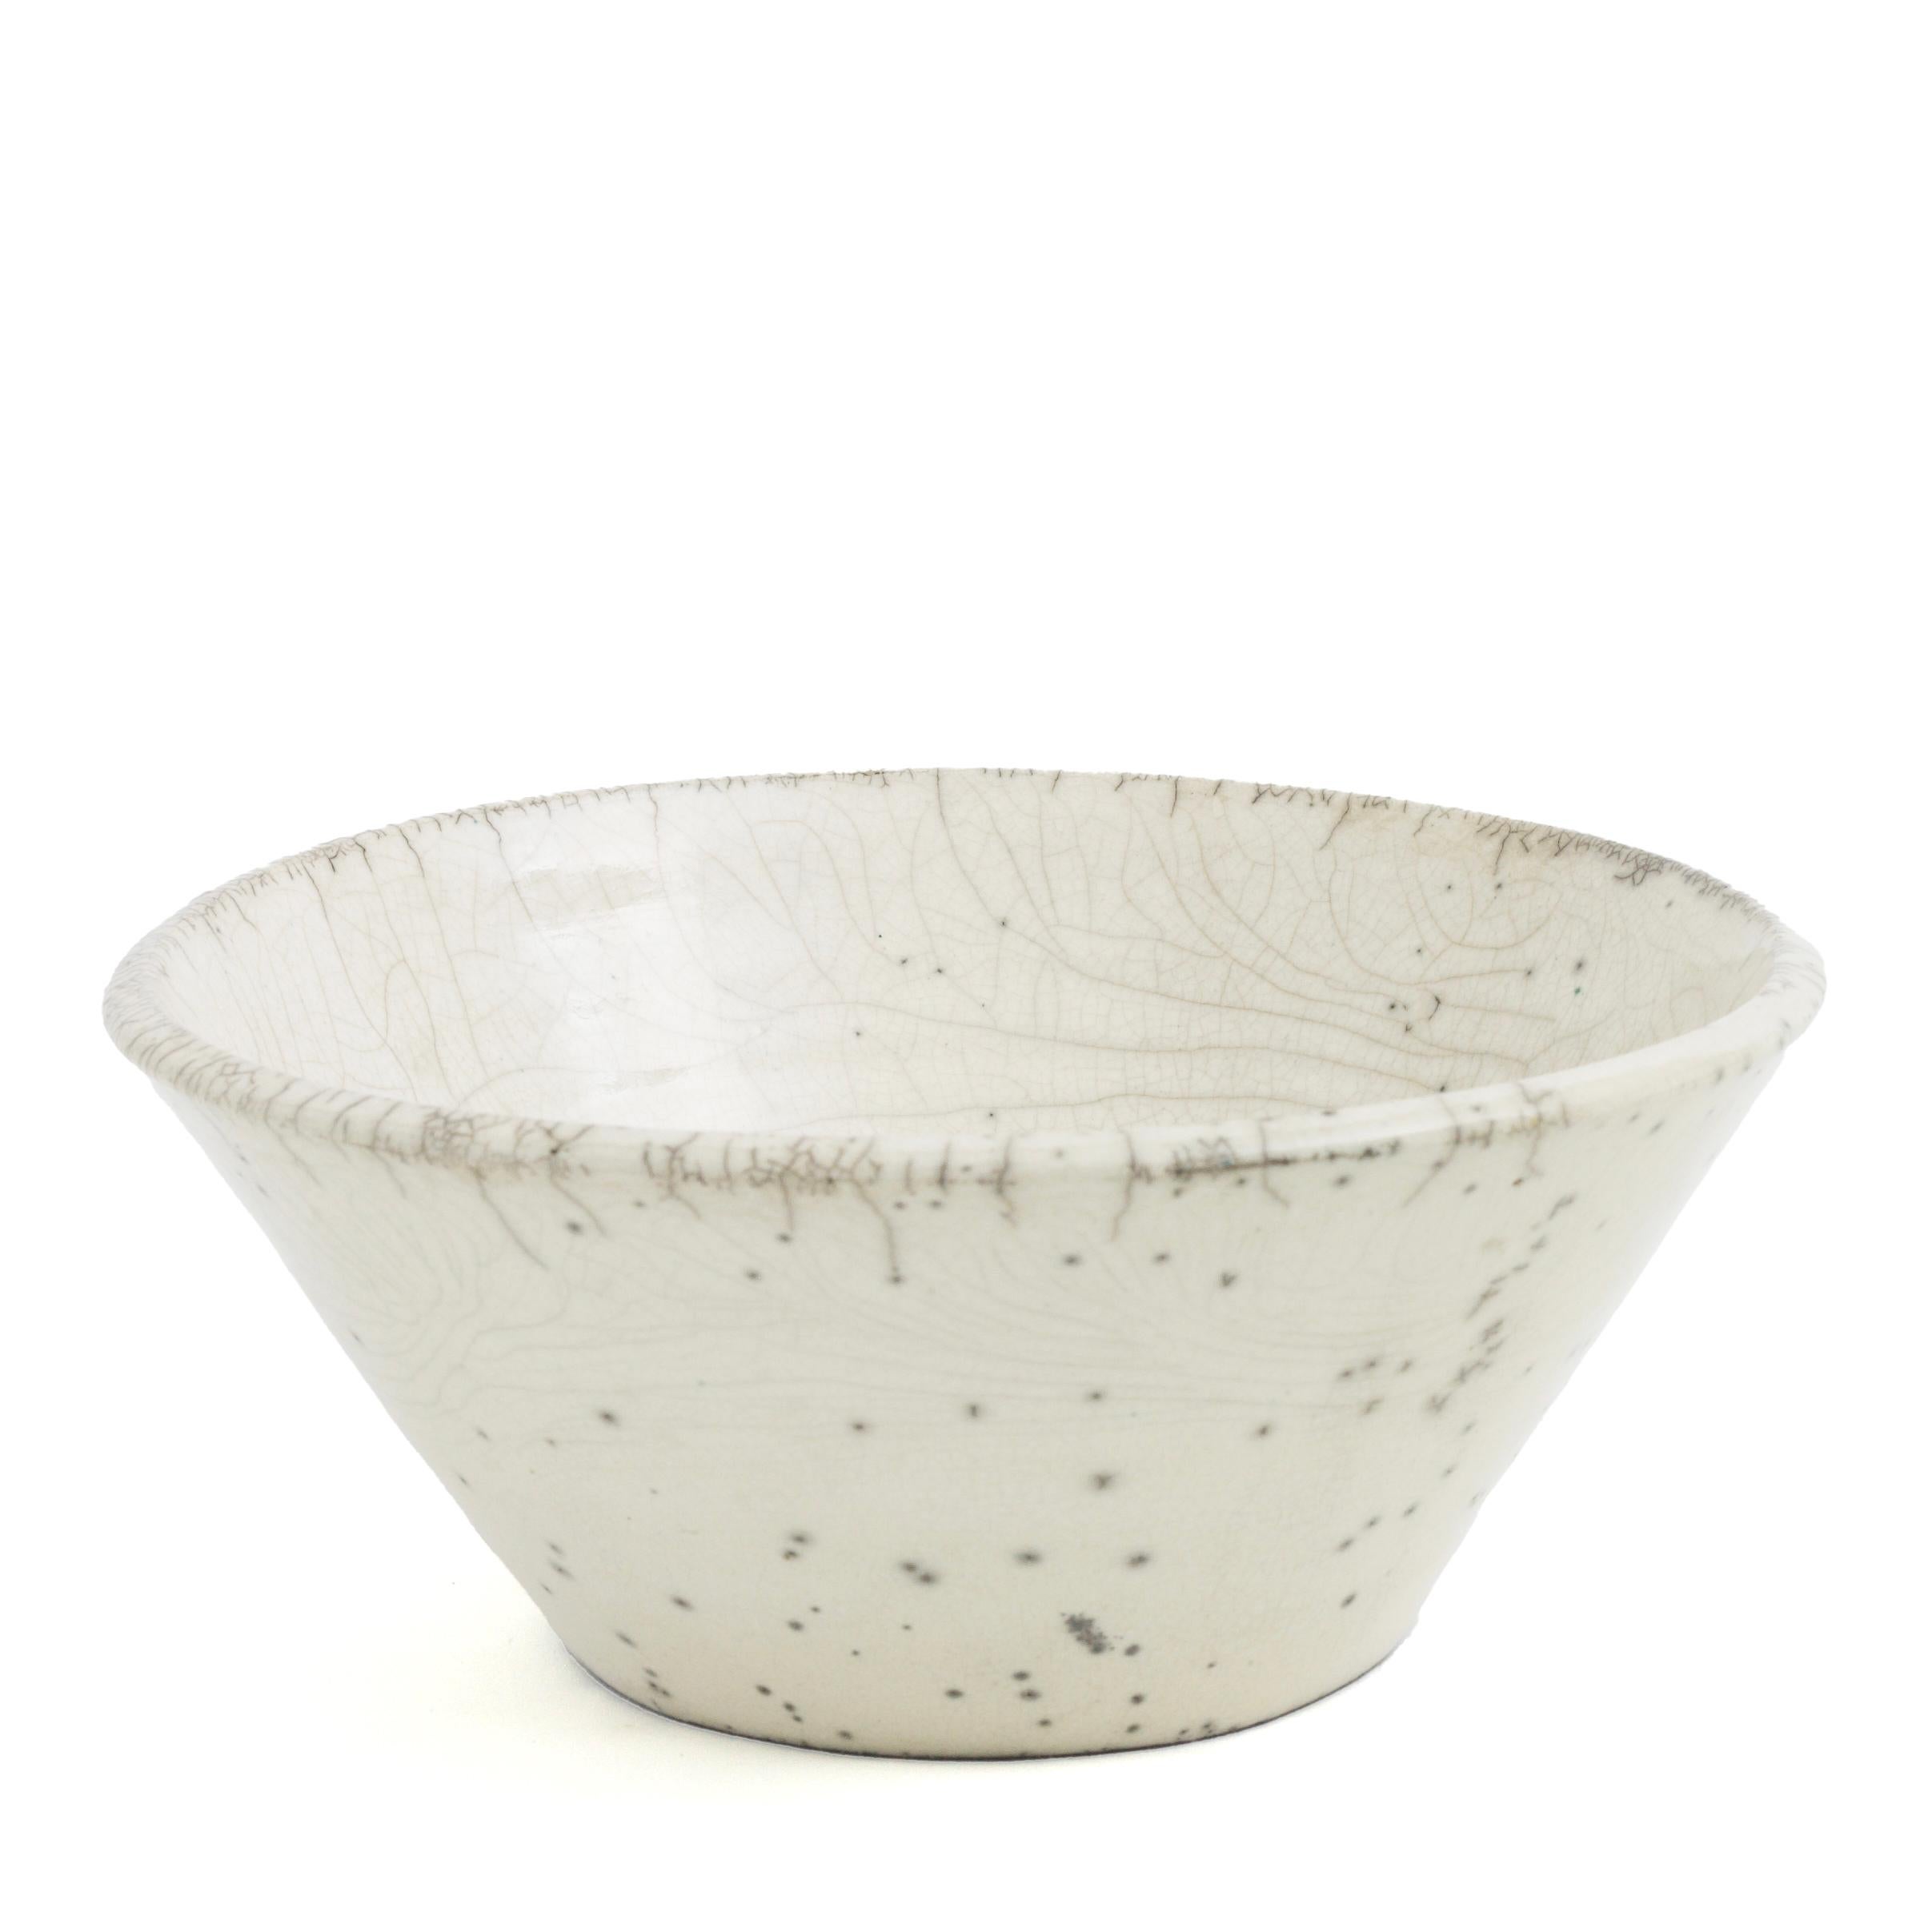 Japanese Minimalistic LAAB Moon Set of 5 Bowls Raku Ceramics Crackle White In New Condition For Sale In monza, Monza and Brianza